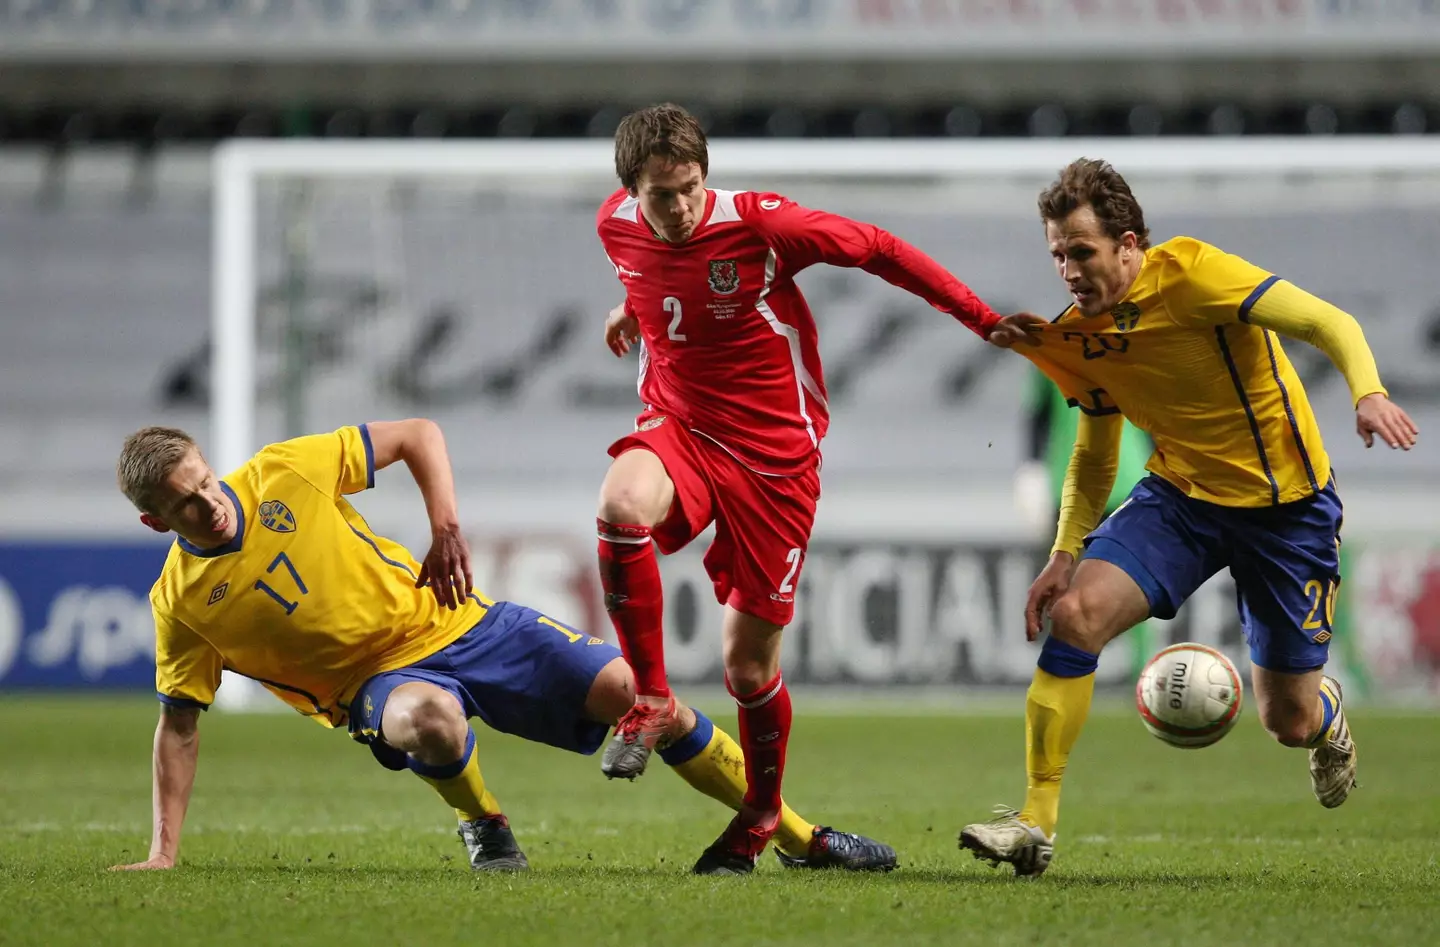 Pontus Wernbloom and Tobias Hysen in action for Sweden in a clash against Wales. Image credit: Alamy